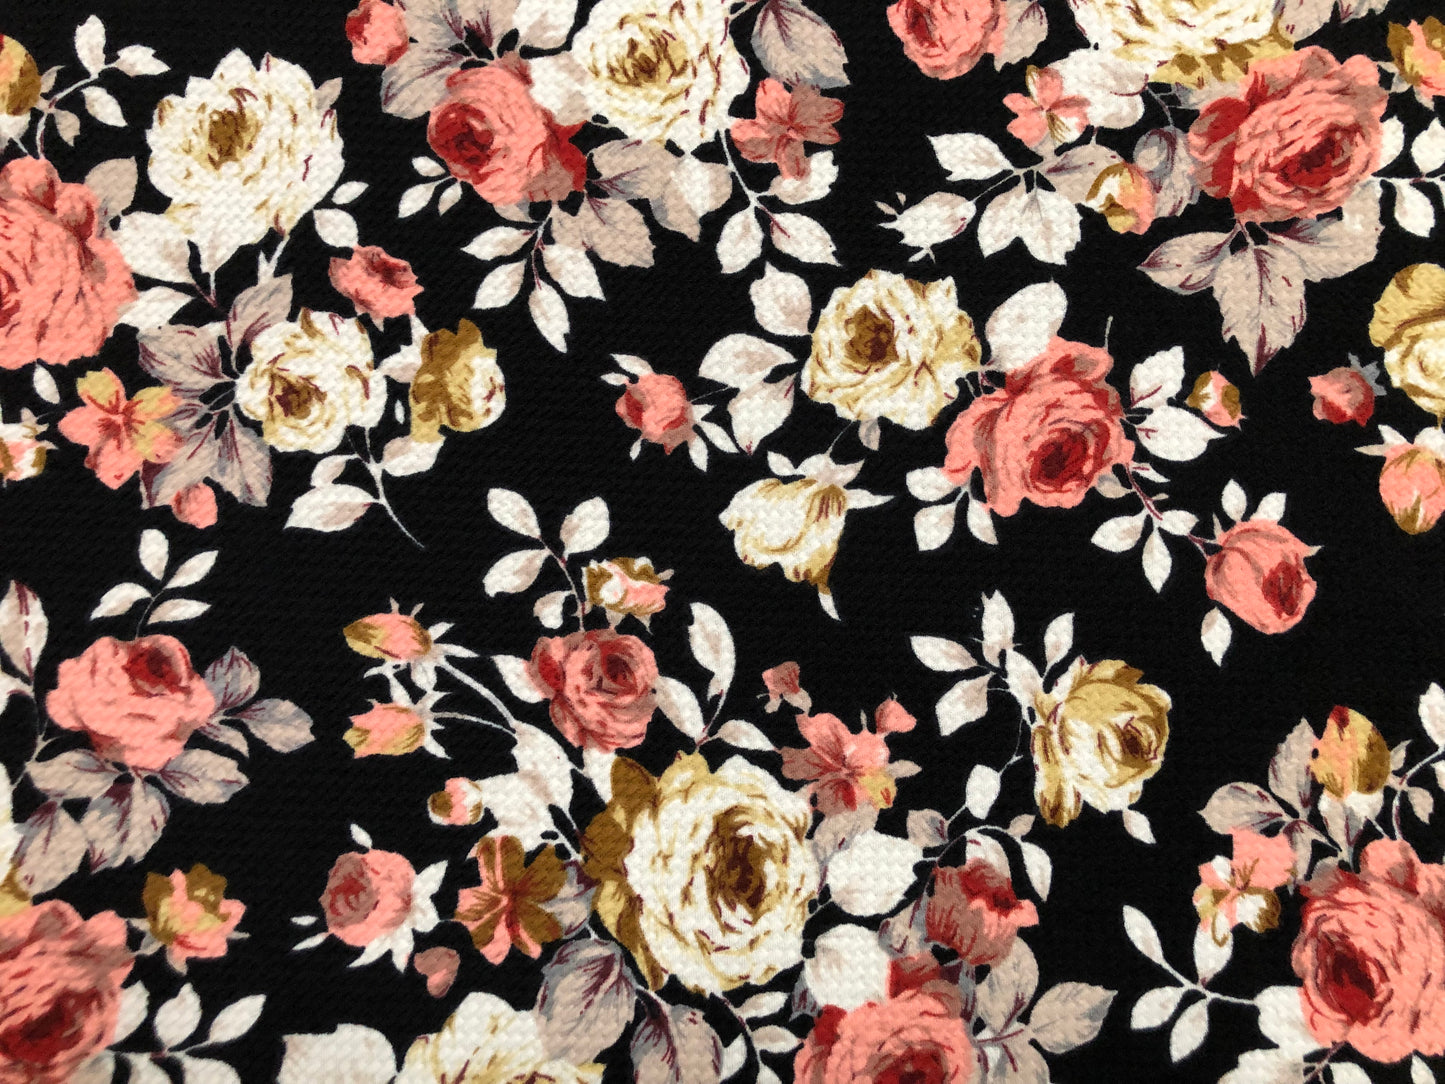 Bullet Knit Printed Fabric-Black White Mauve Roses-BPr256-Sold by the Yard